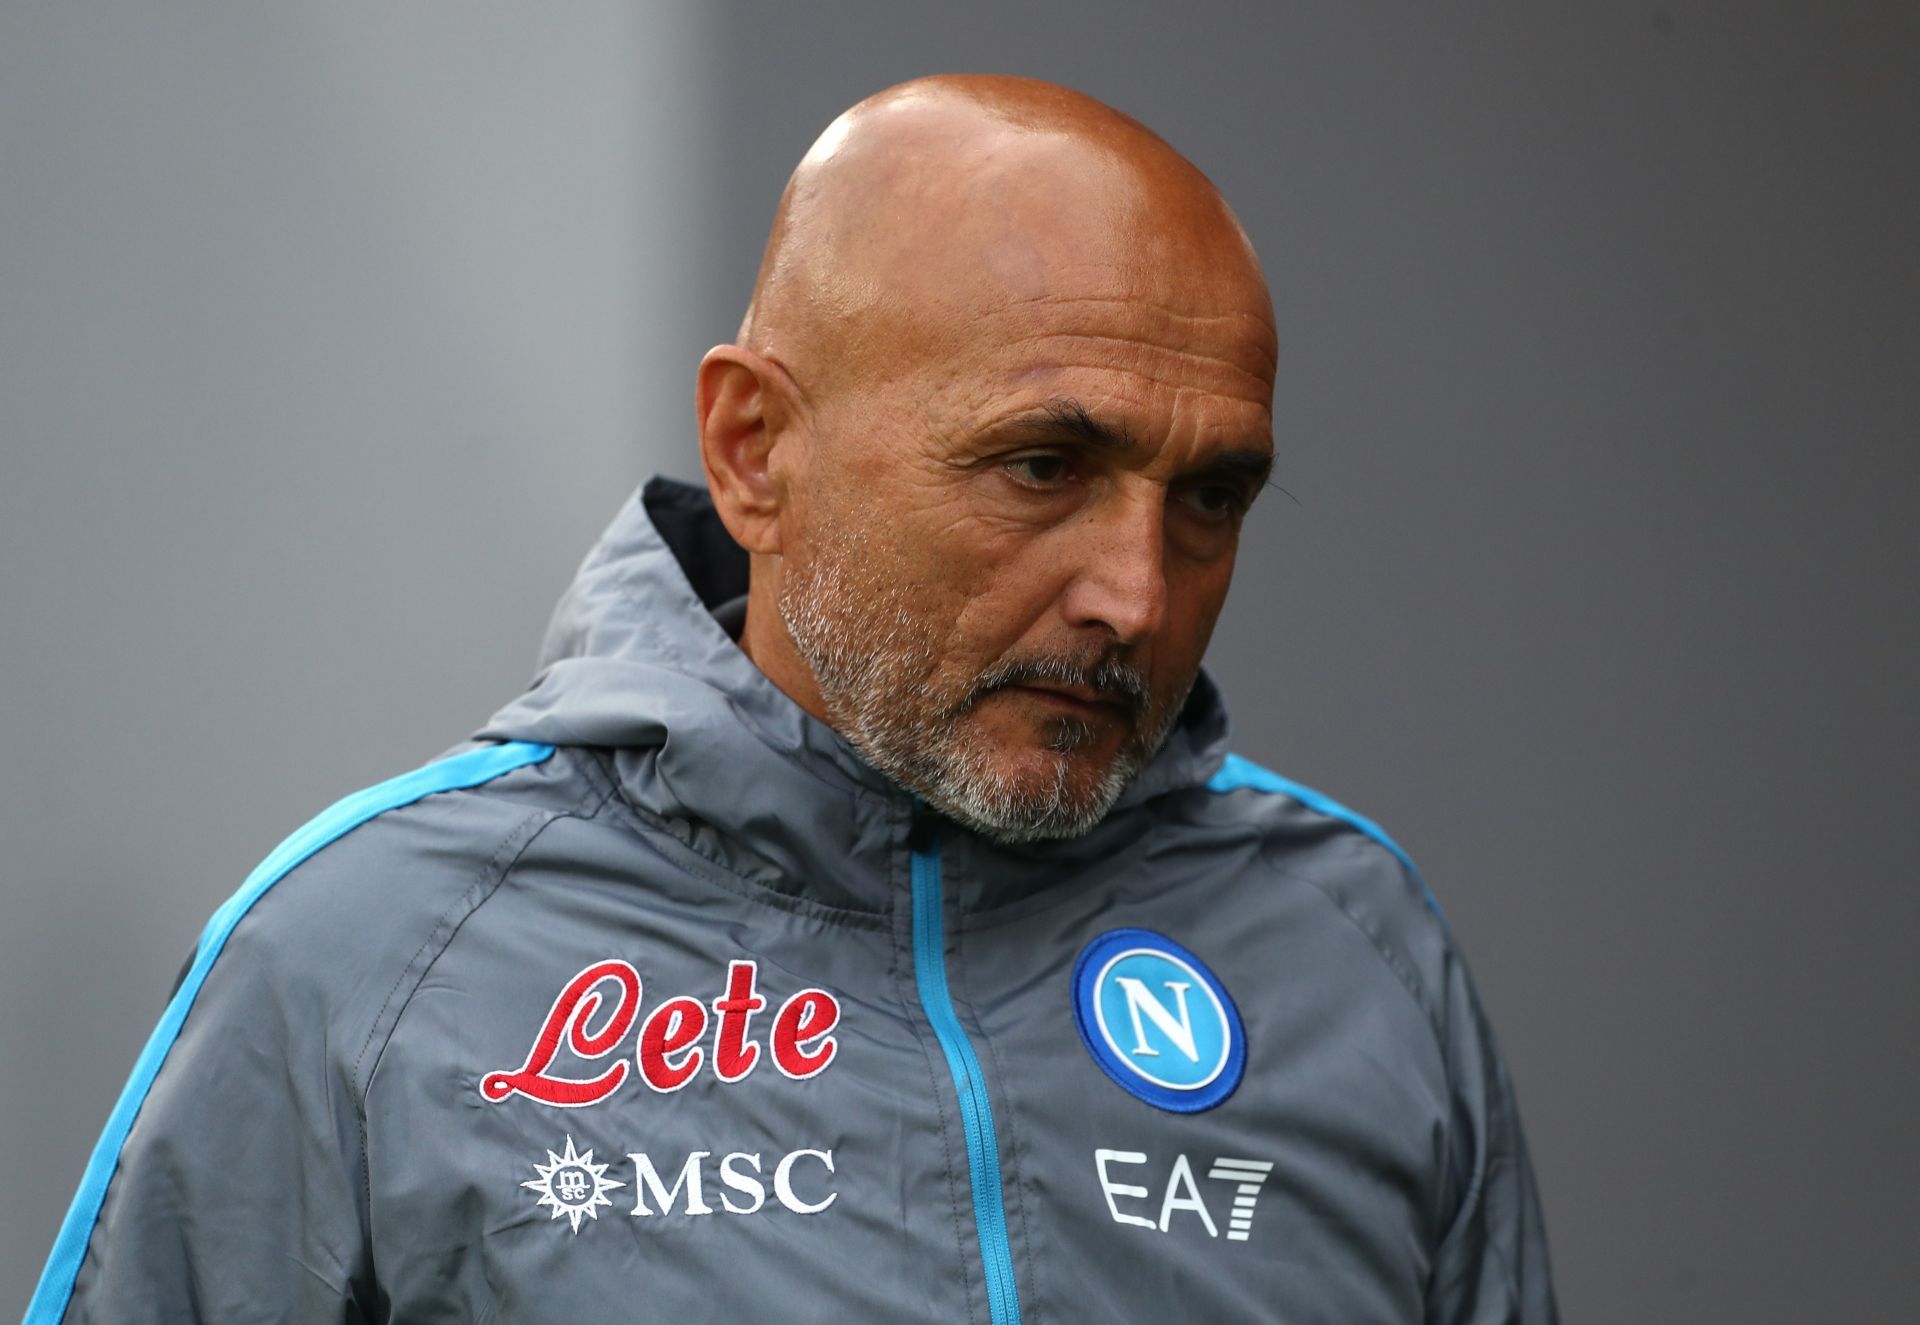 US Cremonese v SSC Napoli - Serie A -Napoli Managers brief